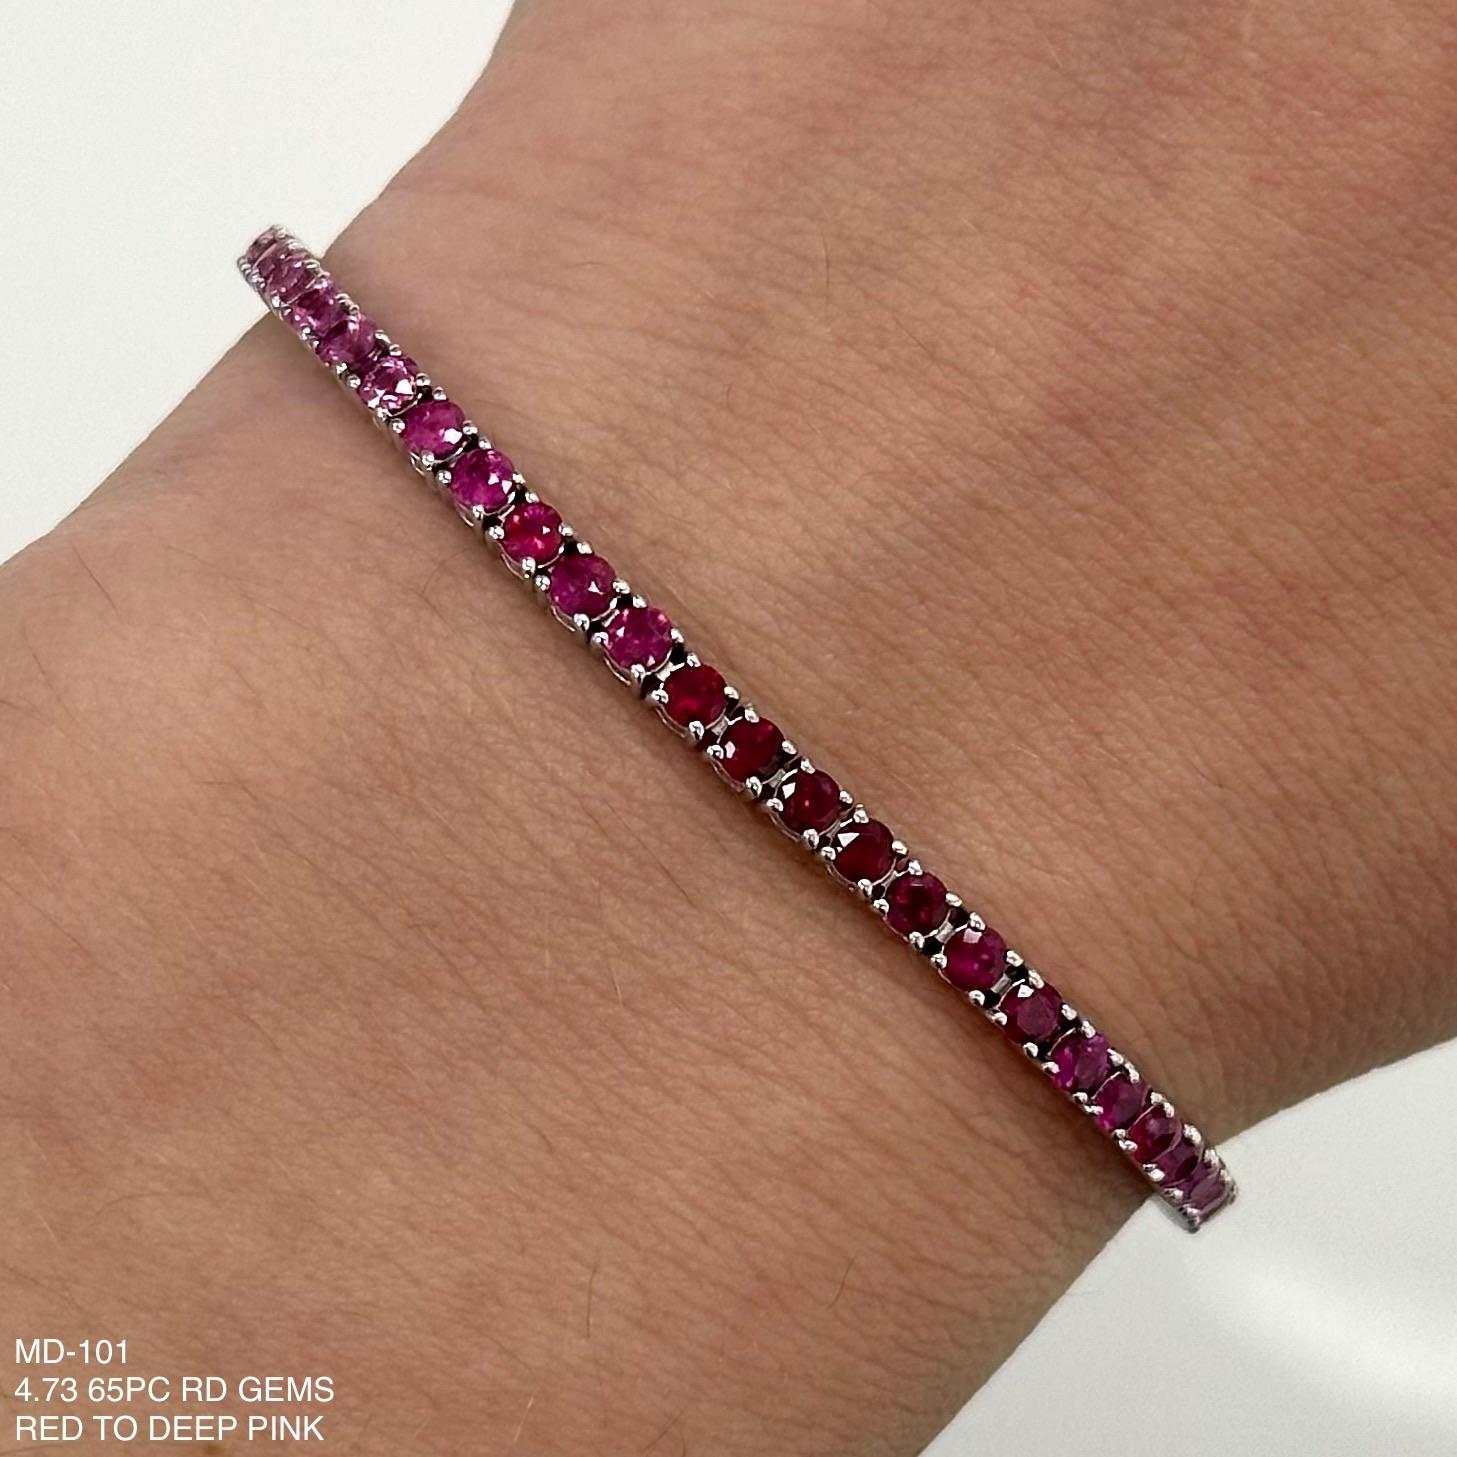 Exquisite and perfectly blended red to pink rubies and sapphires tennis bracelet, by Alexander Beverly Hills.
65 round rubies and pink sapphires, 4.72 carats total. Four prong set in 18-karat white gold, 8.33 grams, 7 inches.
Accommodated with an